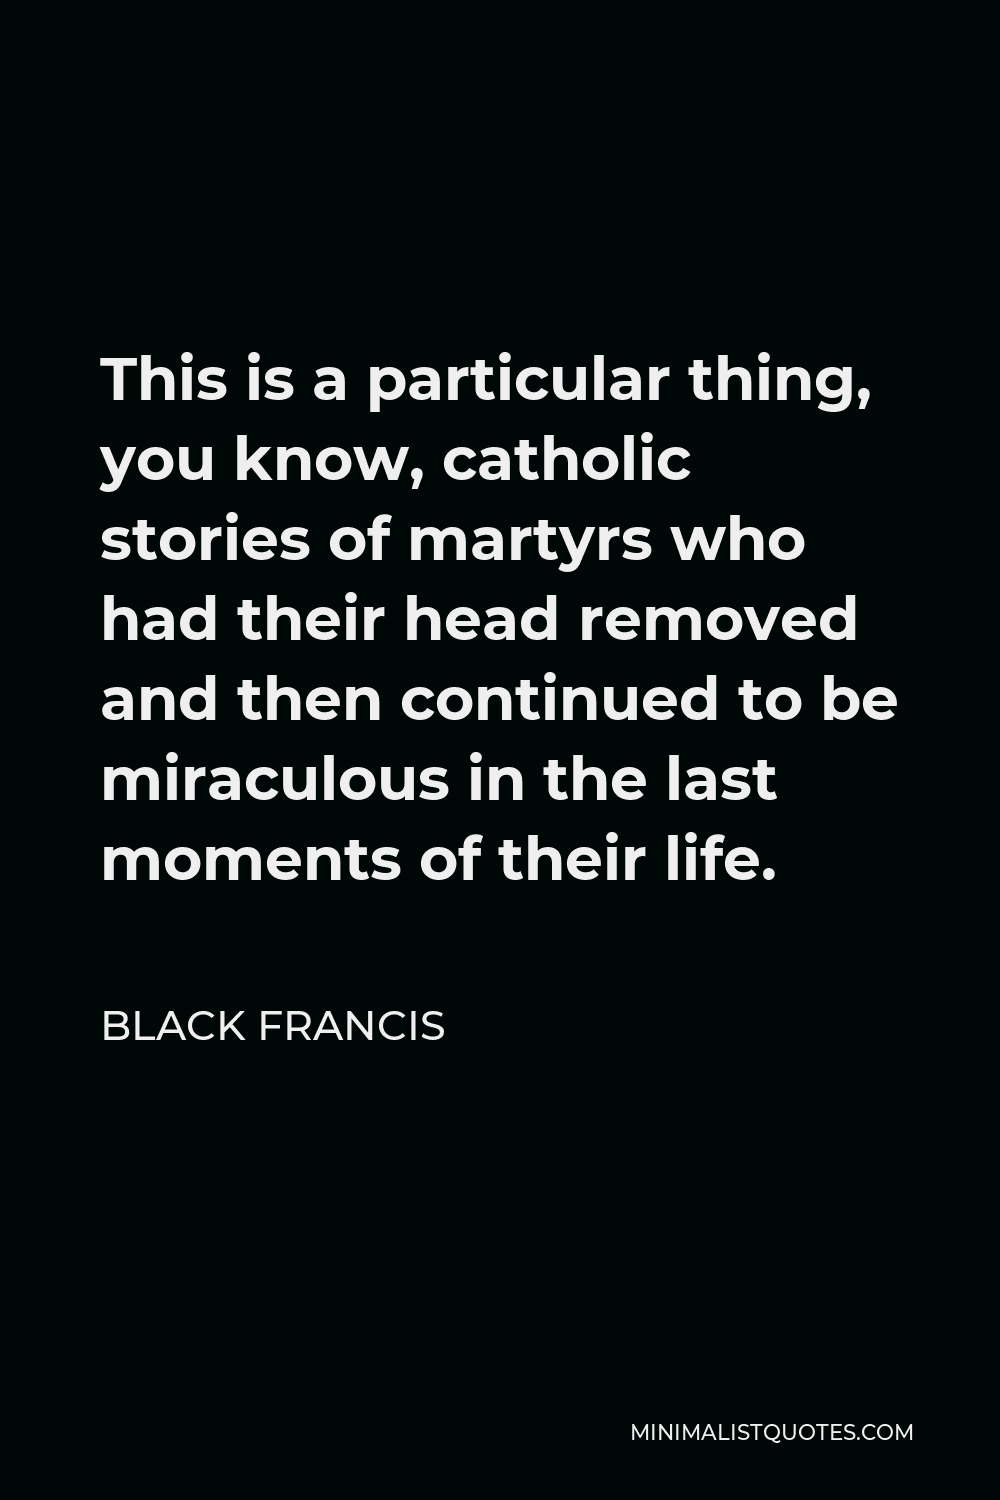 Black Francis Quote - This is a particular thing, you know, catholic stories of martyrs who had their head removed and then continued to be miraculous in the last moments of their life.